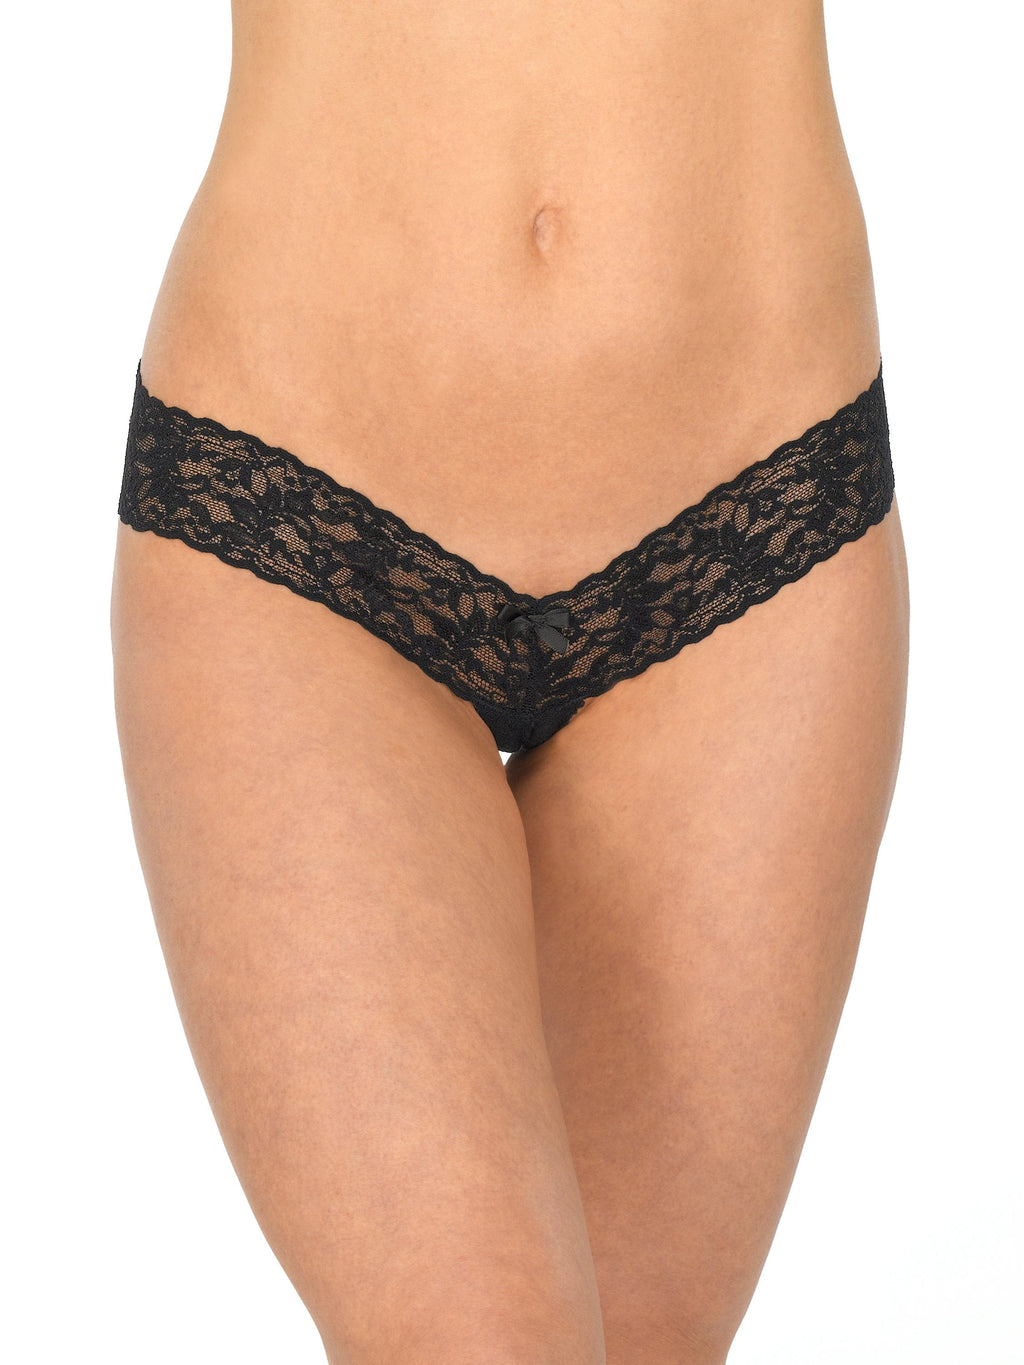 Lacy Souls Presents Crotchless Thong Women's Sexy Panty